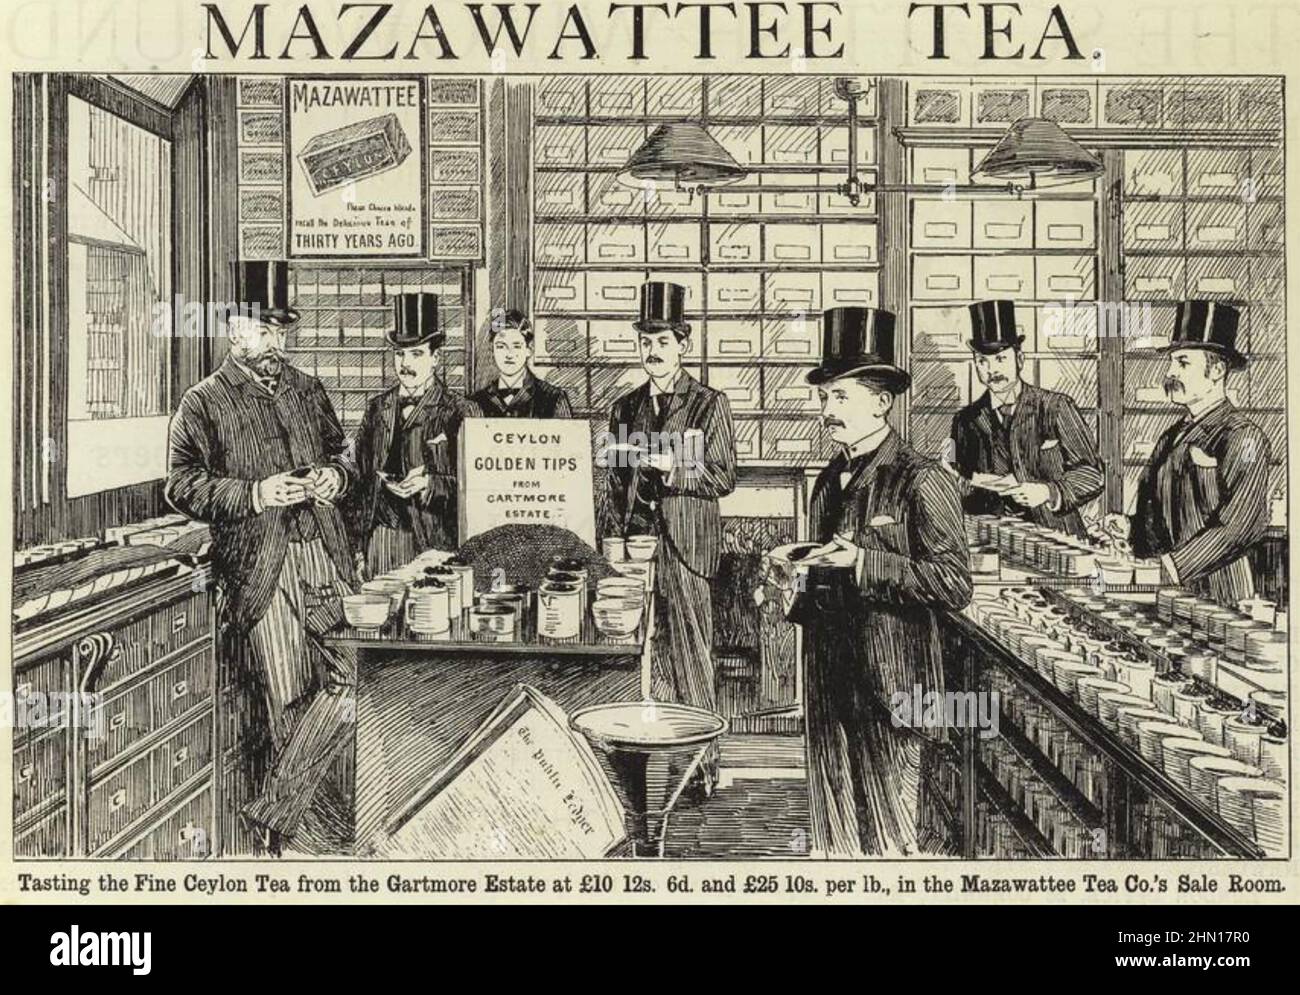 MAZAWATTEE TEA COMPANY  Checking for quality in a late 19th century advert. Stock Photo